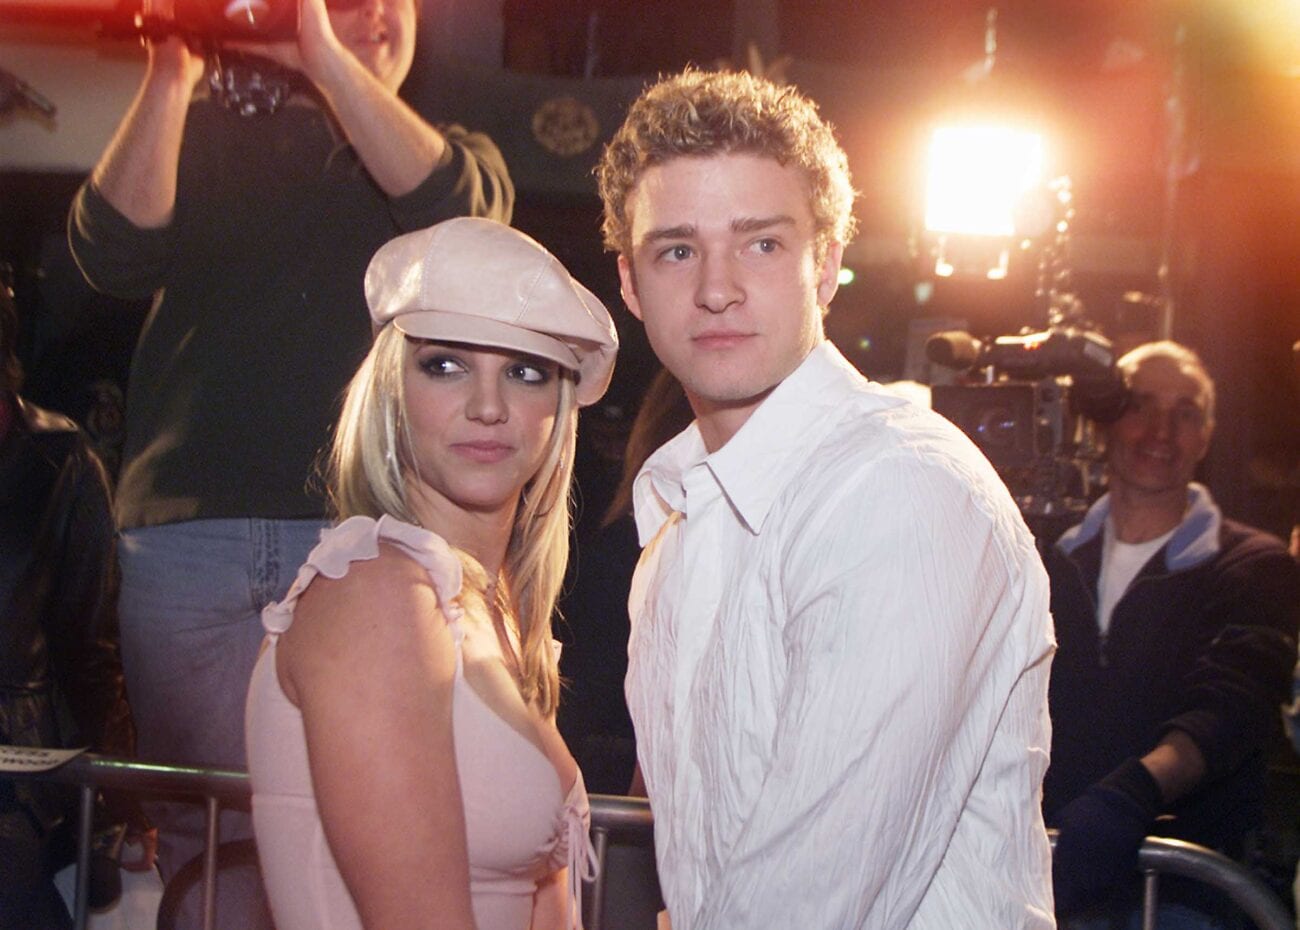 'Framing Britney Spears' has opened people's eyes to the treatment of the popstar. Now people are asking: did she cheat on Justin Timberlake?